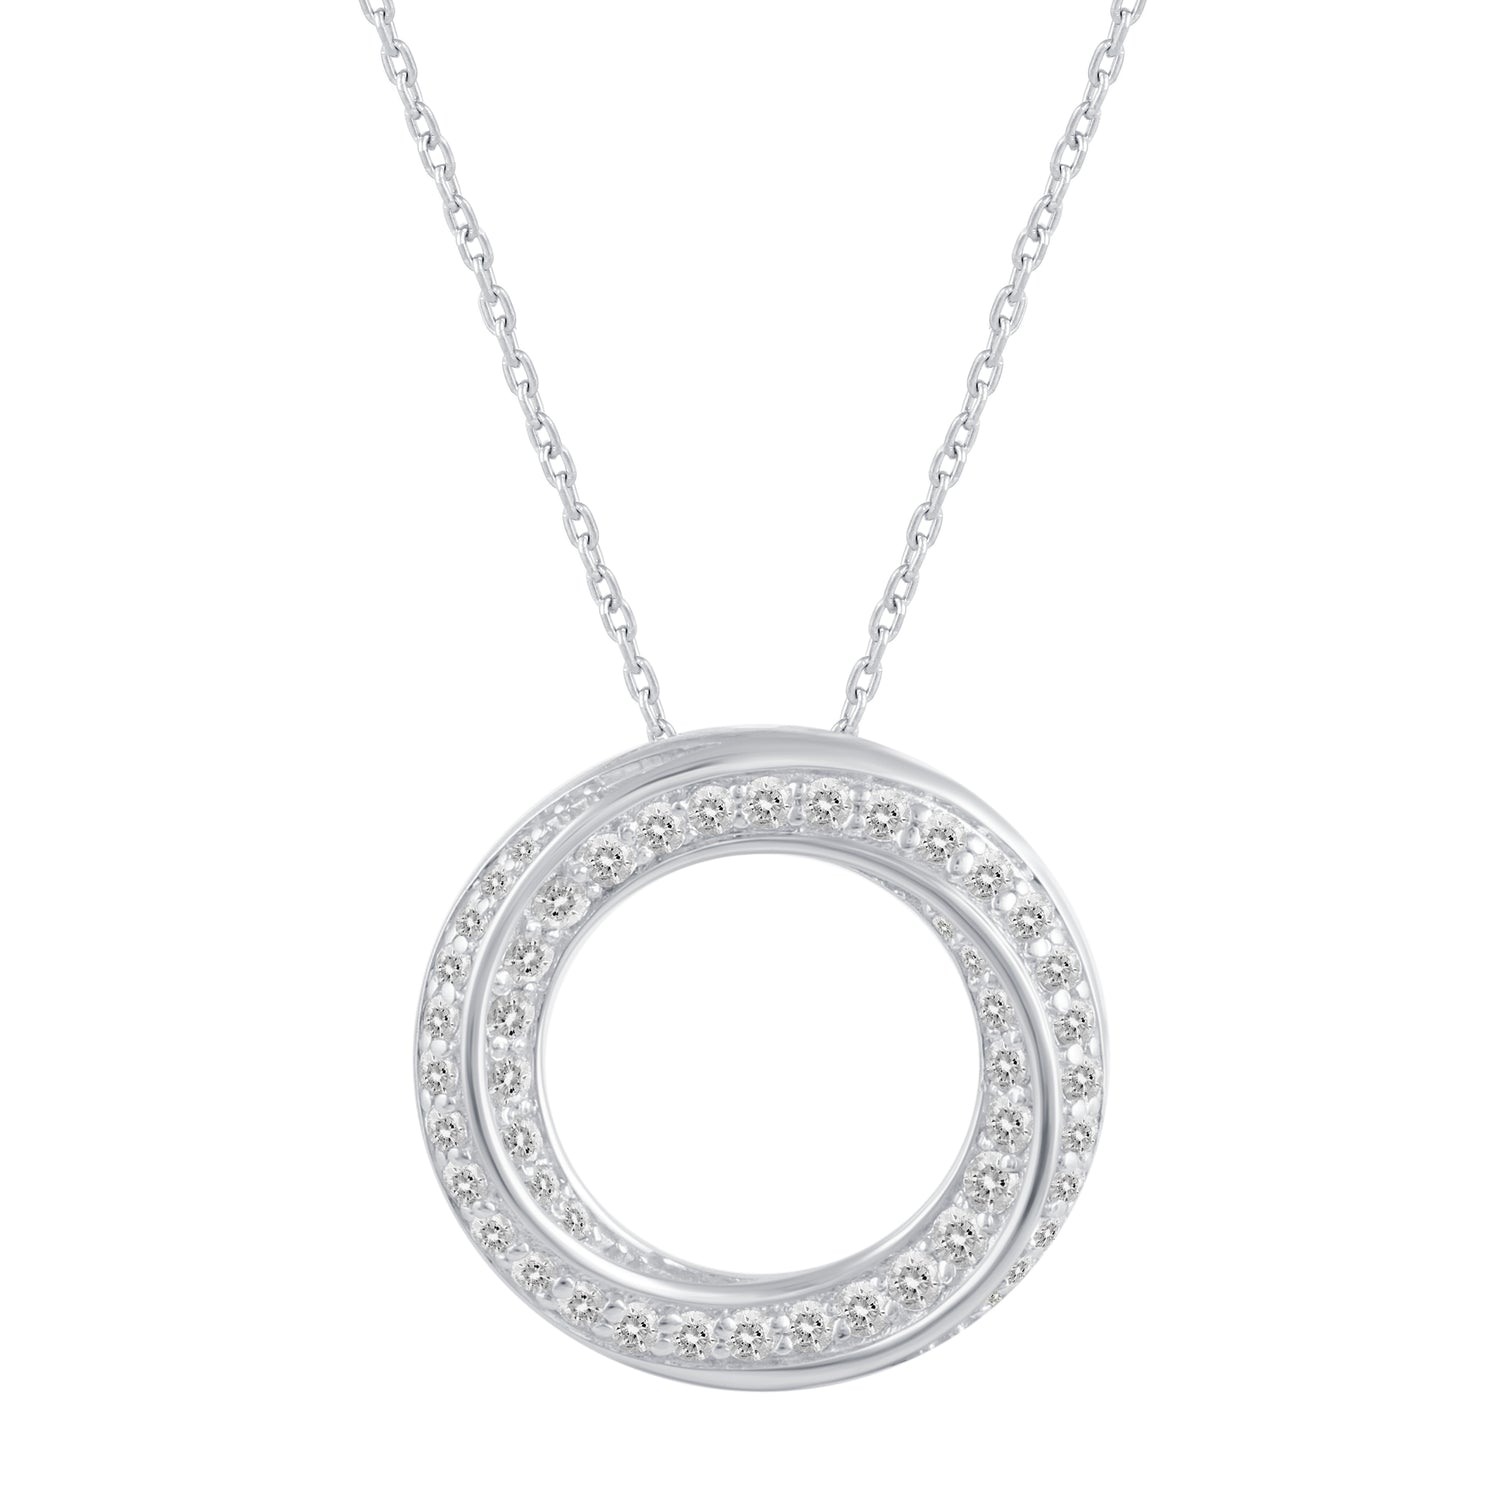 1/2 Cttw Diamond Round Pave Twisted Infinity Pendant Necklace set in 925 Sterling Silver